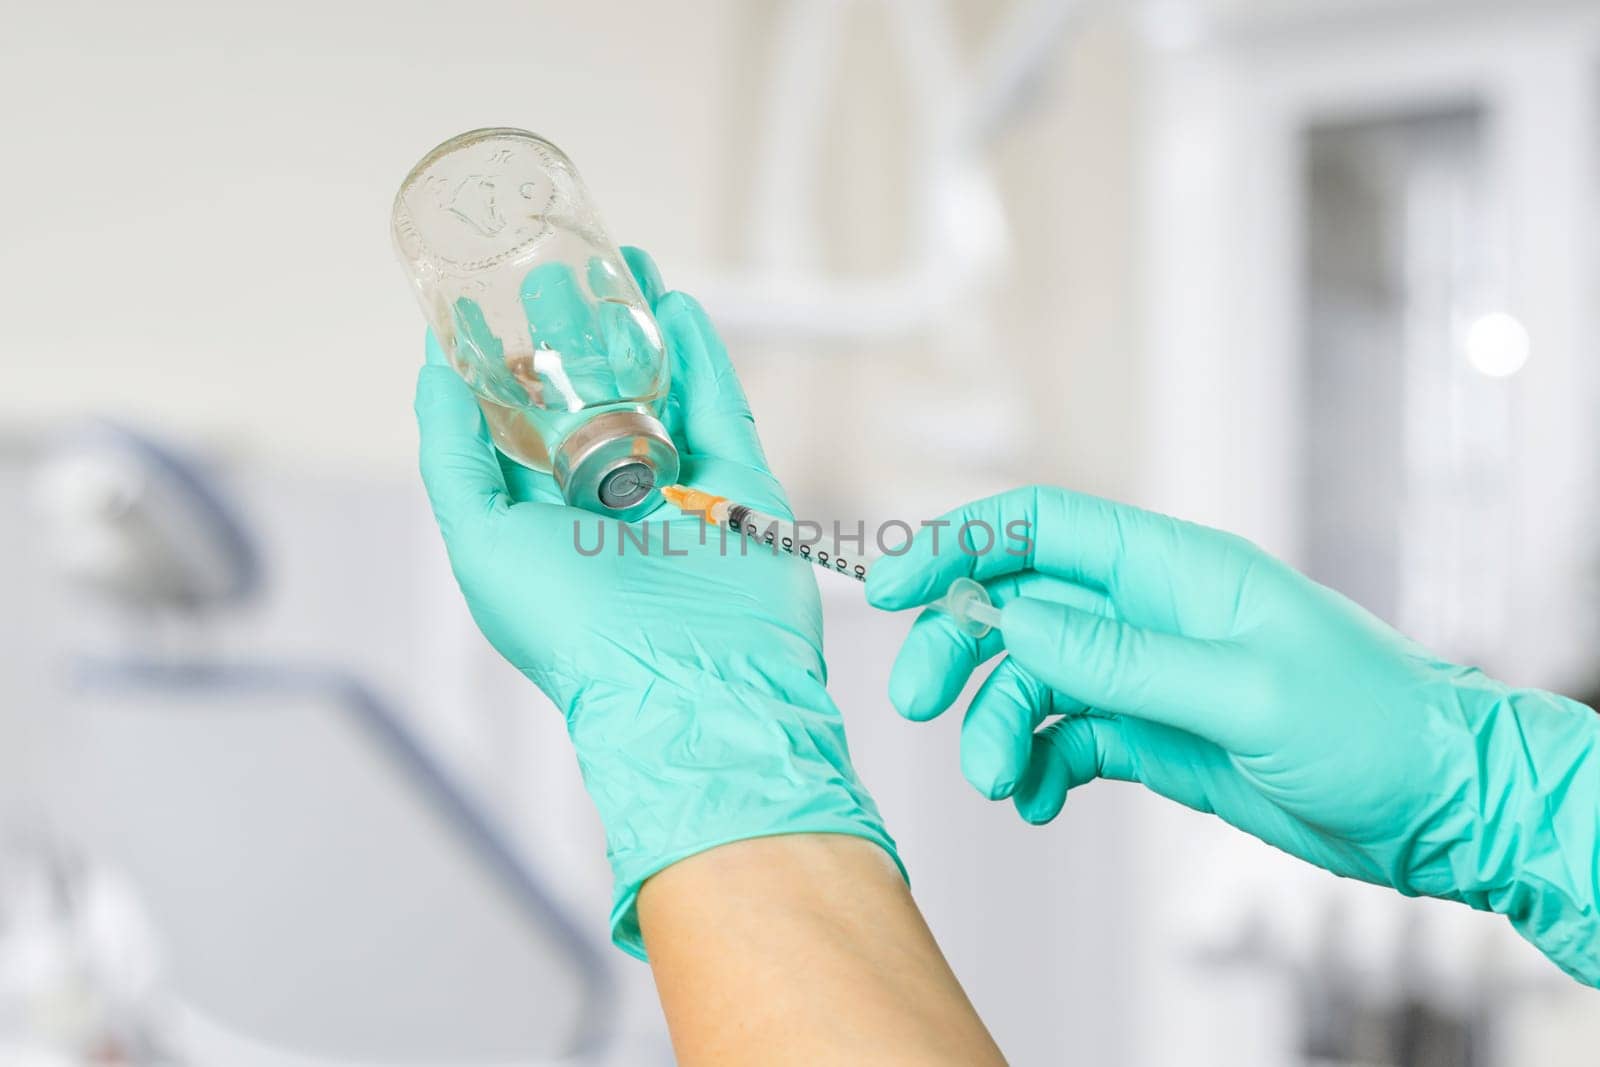 Glass bottle for liquid medicine and a plastic syringe for injection in hands in latex gloves. Dental office on the background.